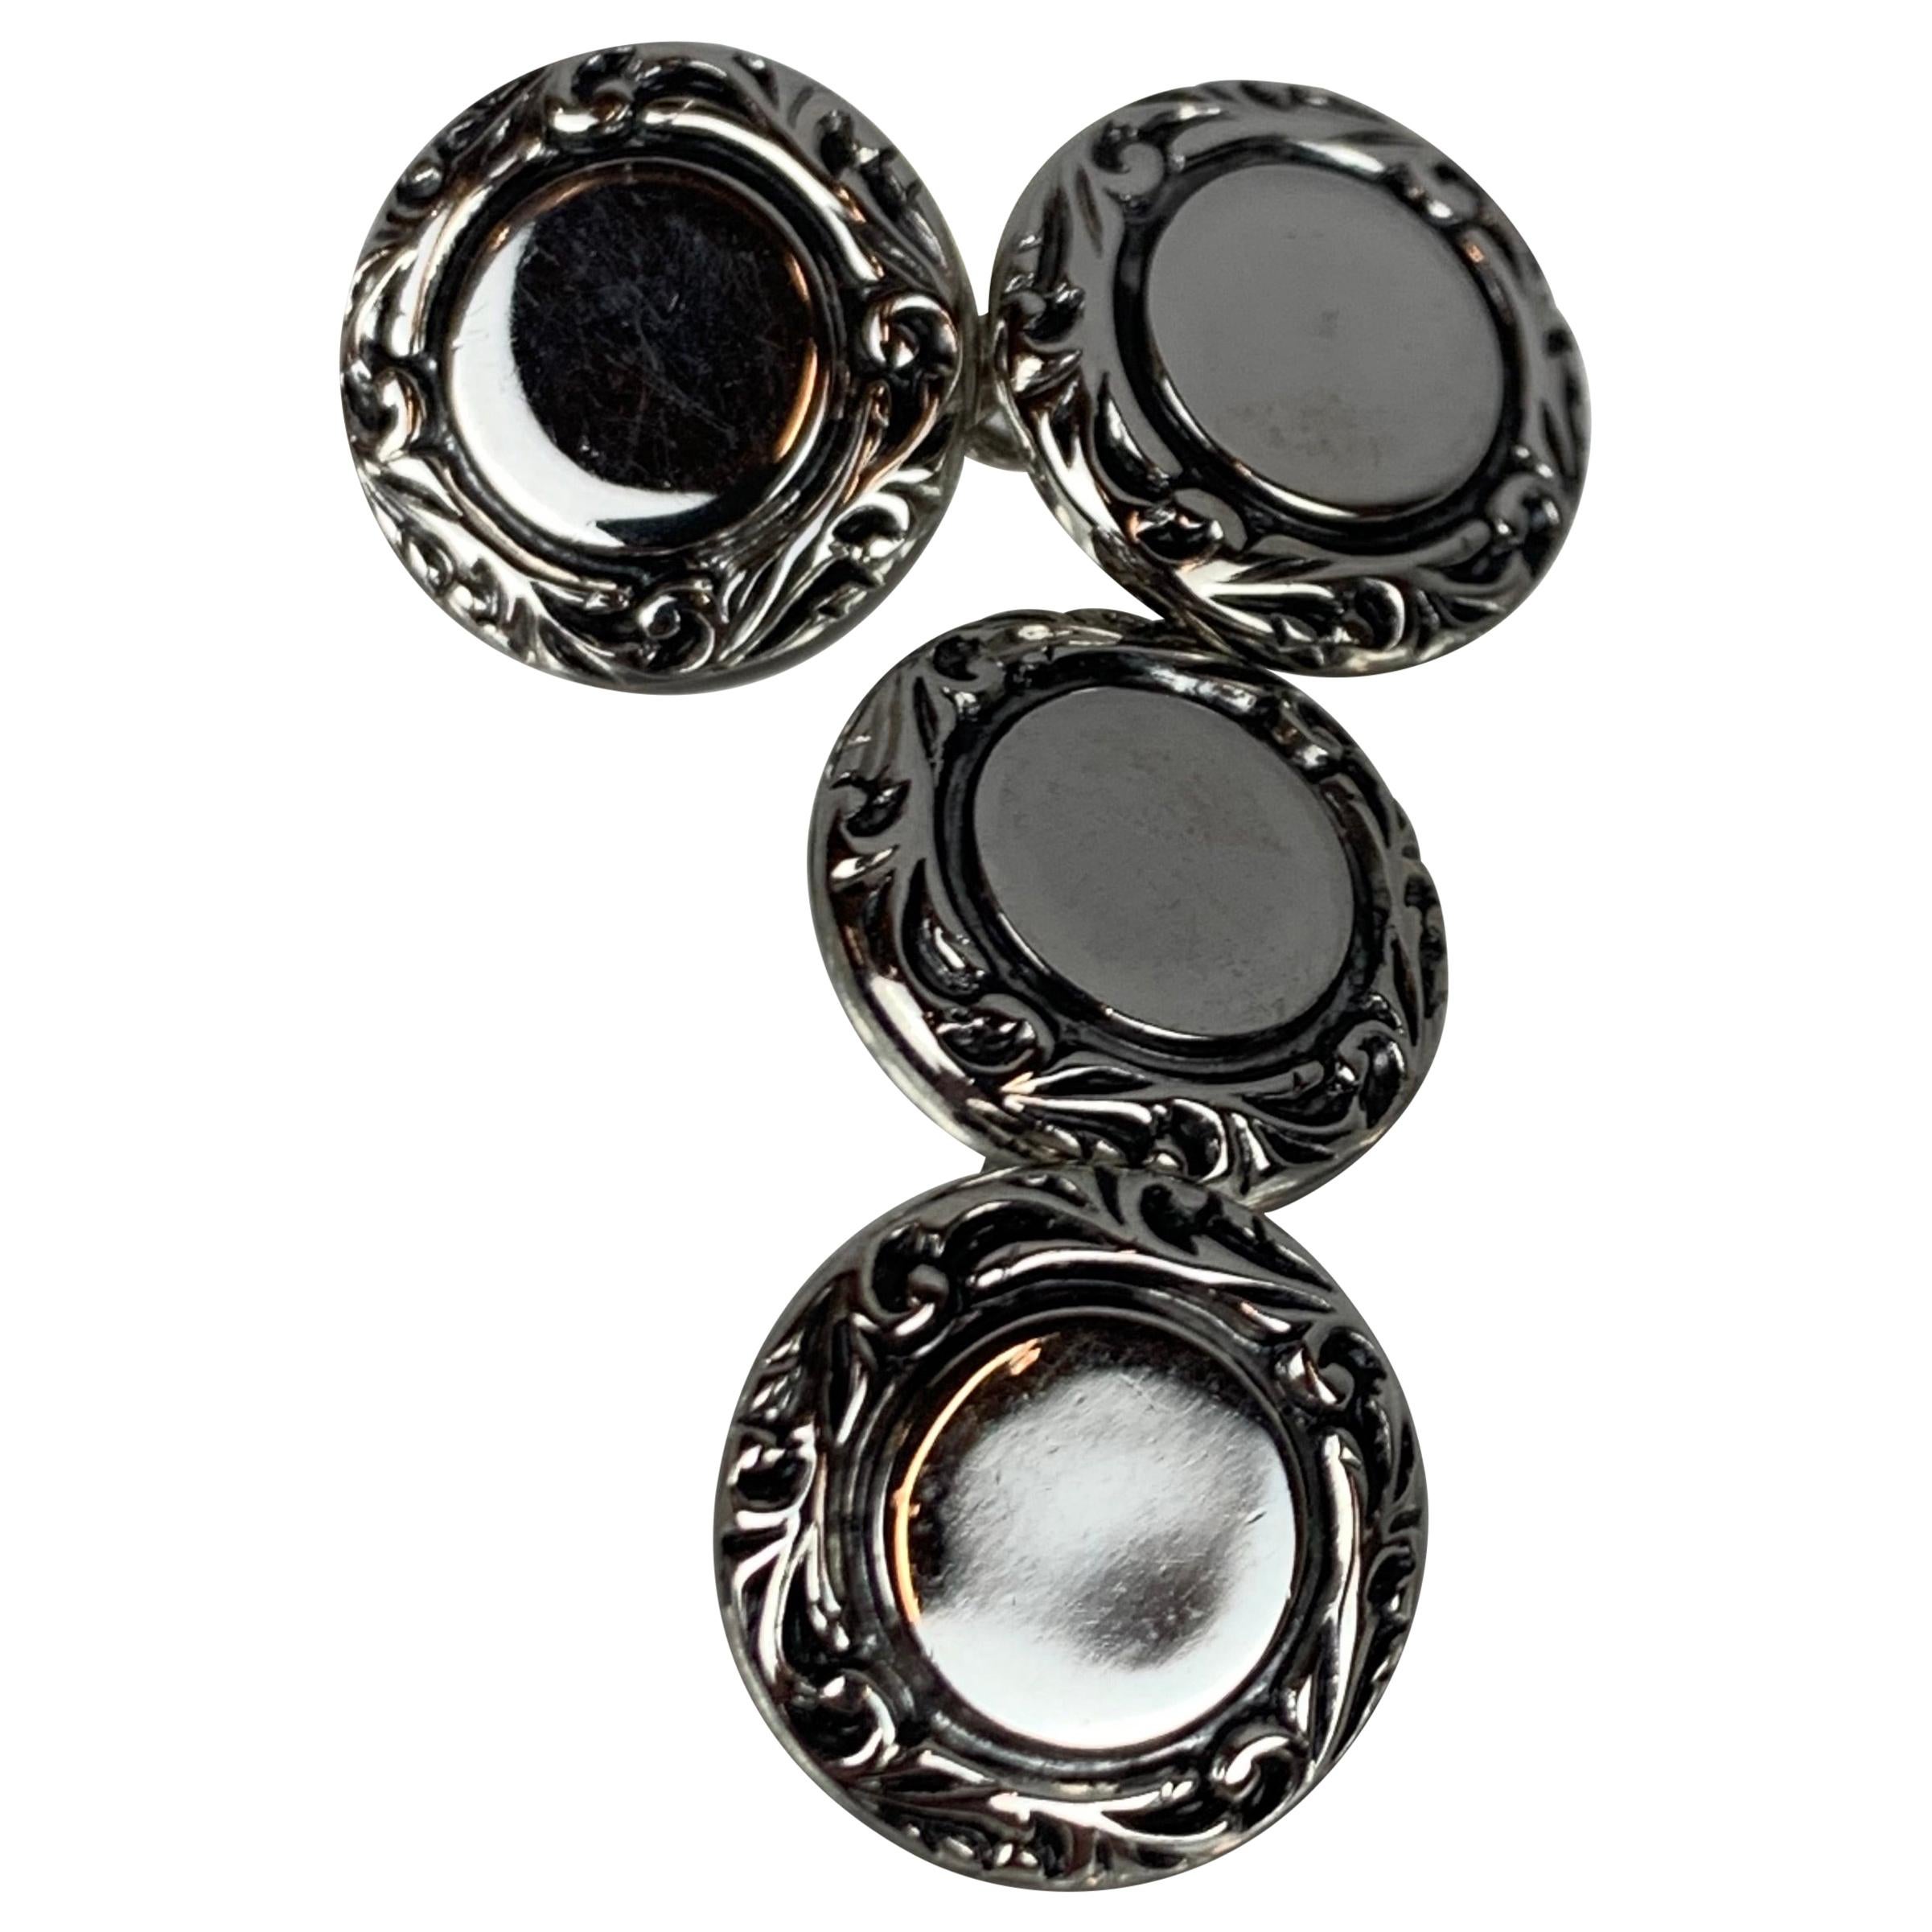 A Pair of vintage silver tone double round cufflinks.   The scrolled border surrounds a flat central plateau.  The round discs are connected by small chains.  Their size makes them easy to slip into french cuff shirts.
Measurements-disc to disc  1